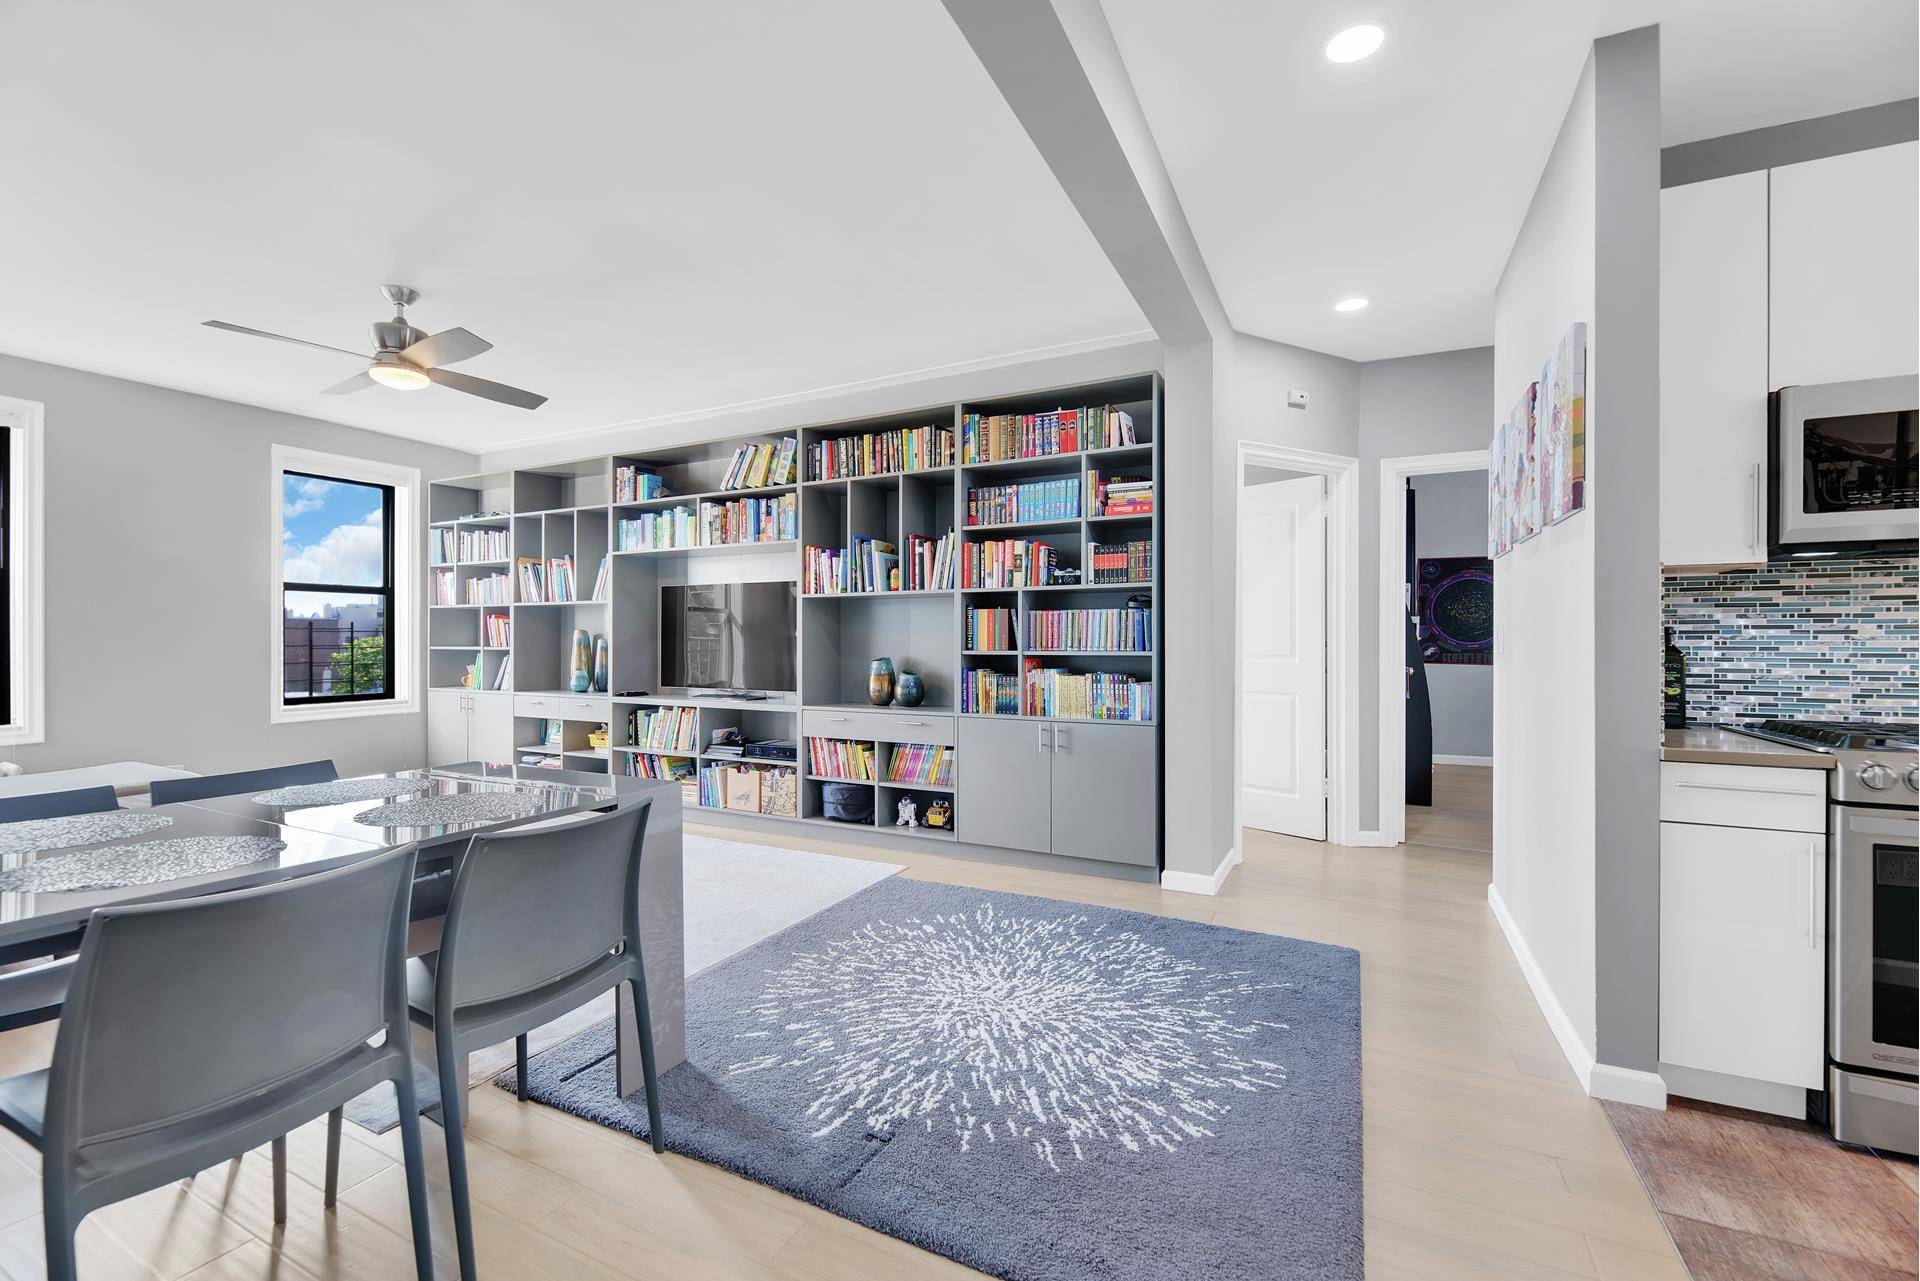 All showings including open houses must be made by appointment only With modern elegance and tasteful design, residence E4 at 351 Marine Avenue in Bay Ridge, Brooklyn is sure to ...